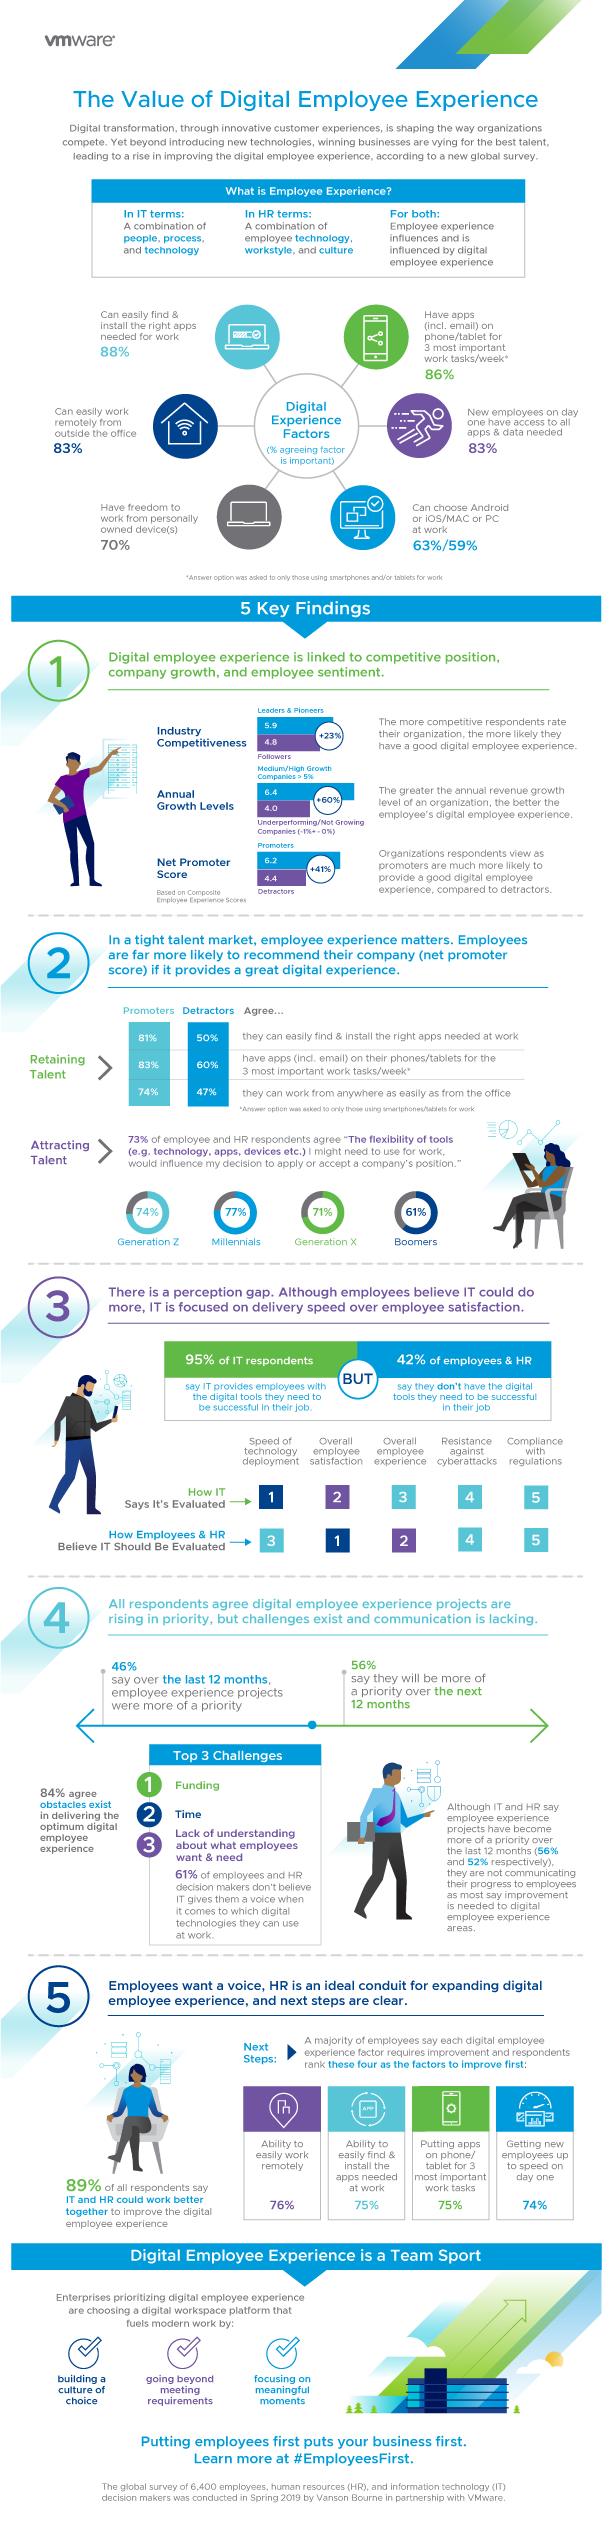 digital_employee_experience_infographic